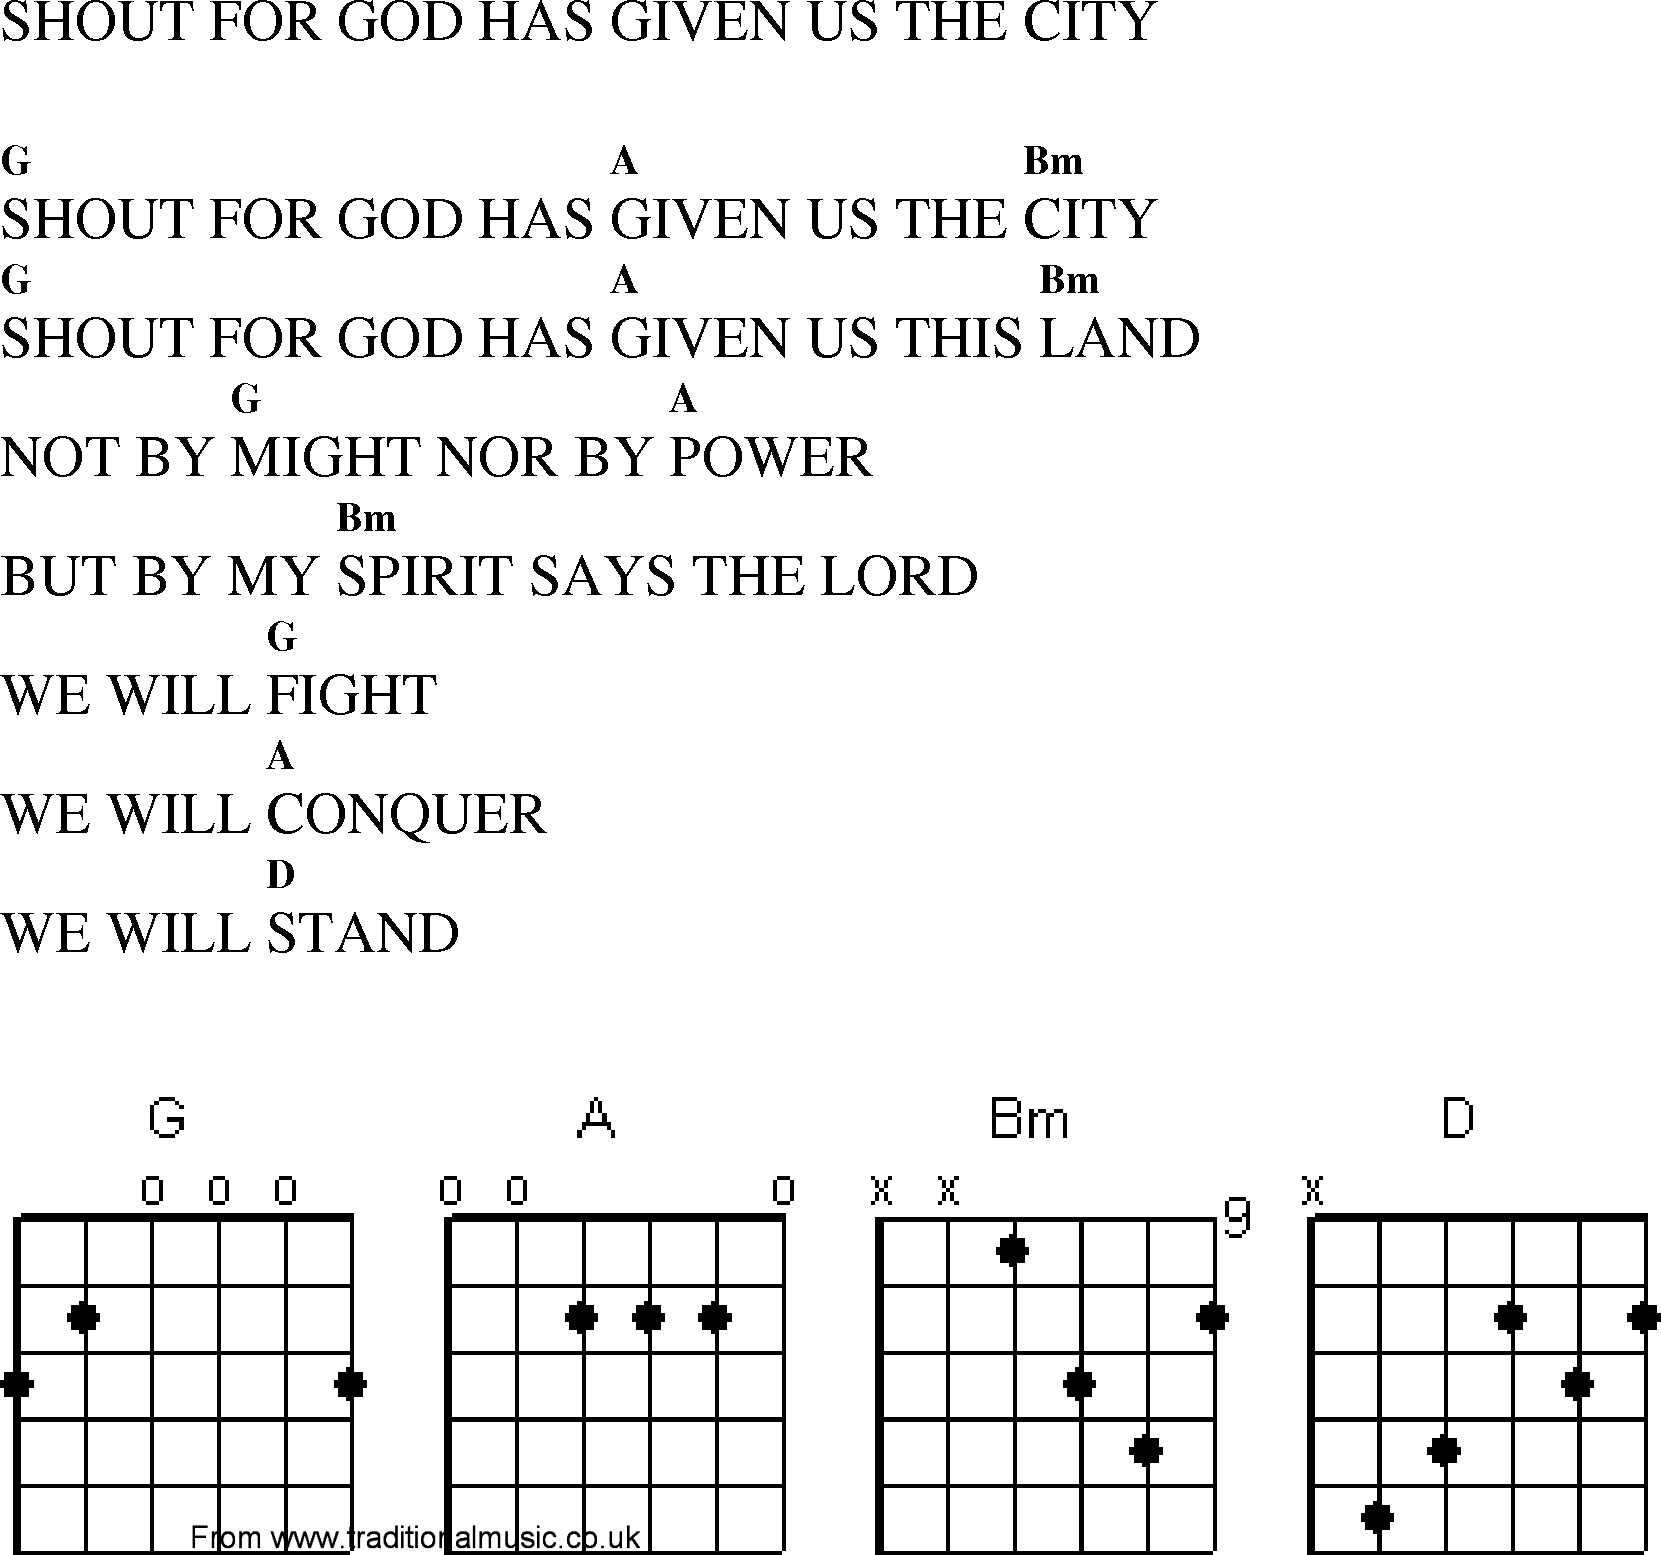 Gospel Song: shout_for_god_has_given_us_the_city, lyrics and chords.